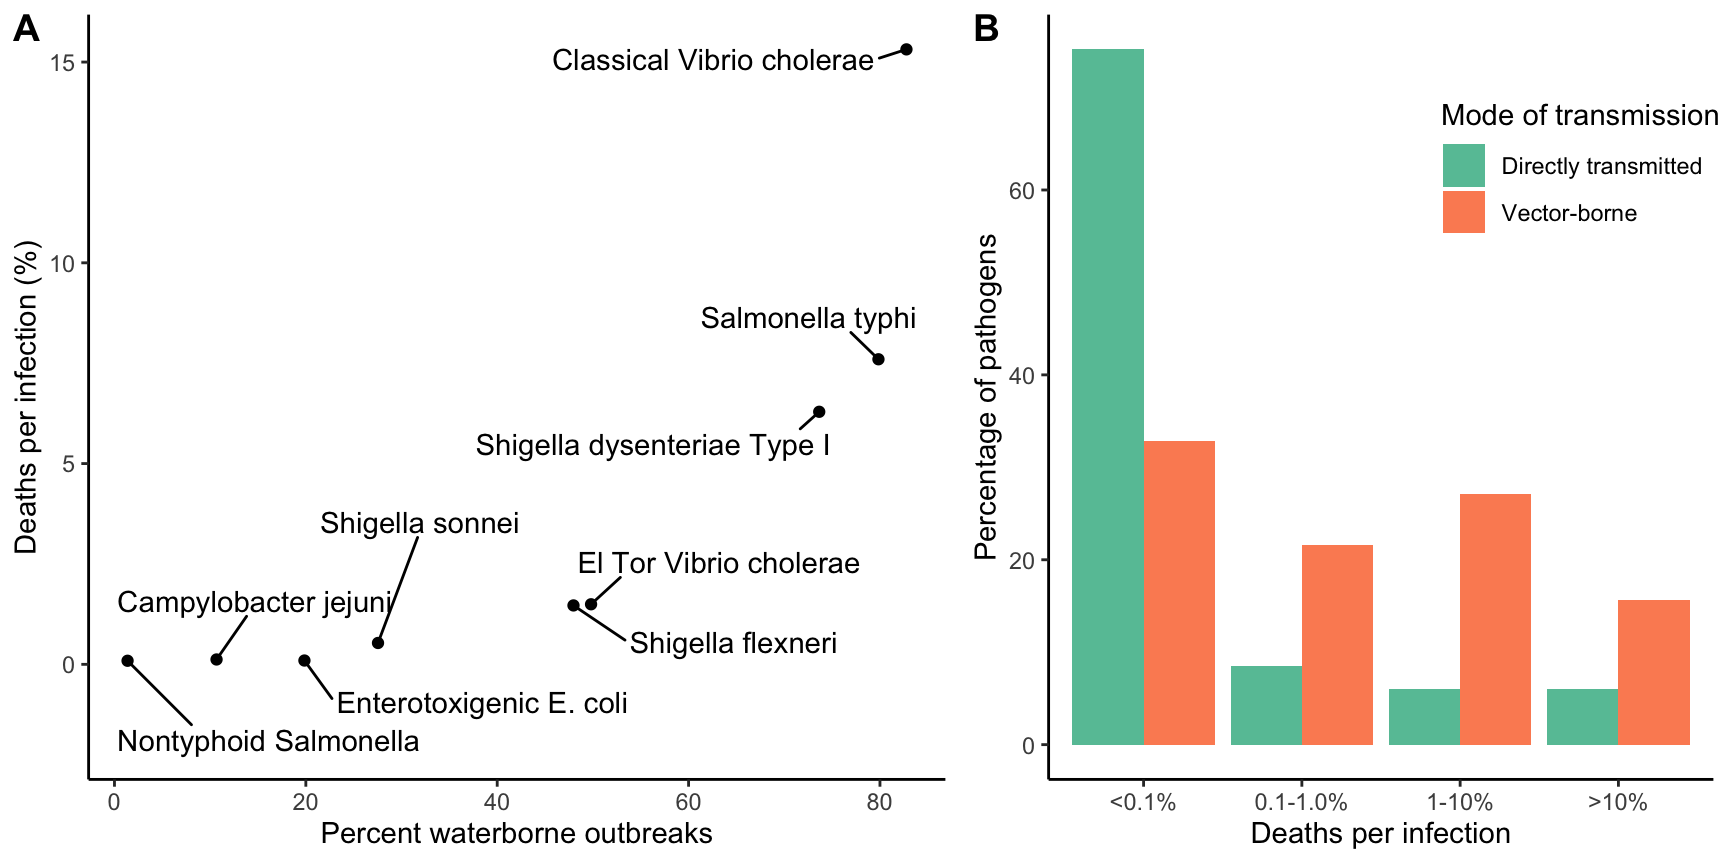 A. Virulence is higher in bacterial pathogens that are associated with frequent waterborne outbreaks. [Data](data/13_waterborne.csv) from Ewald (1991). B. Comparison of virulence between directly-transmitted and vectorborne pathogens. [Data](data/13_vector.csv) from Ewald (1983).